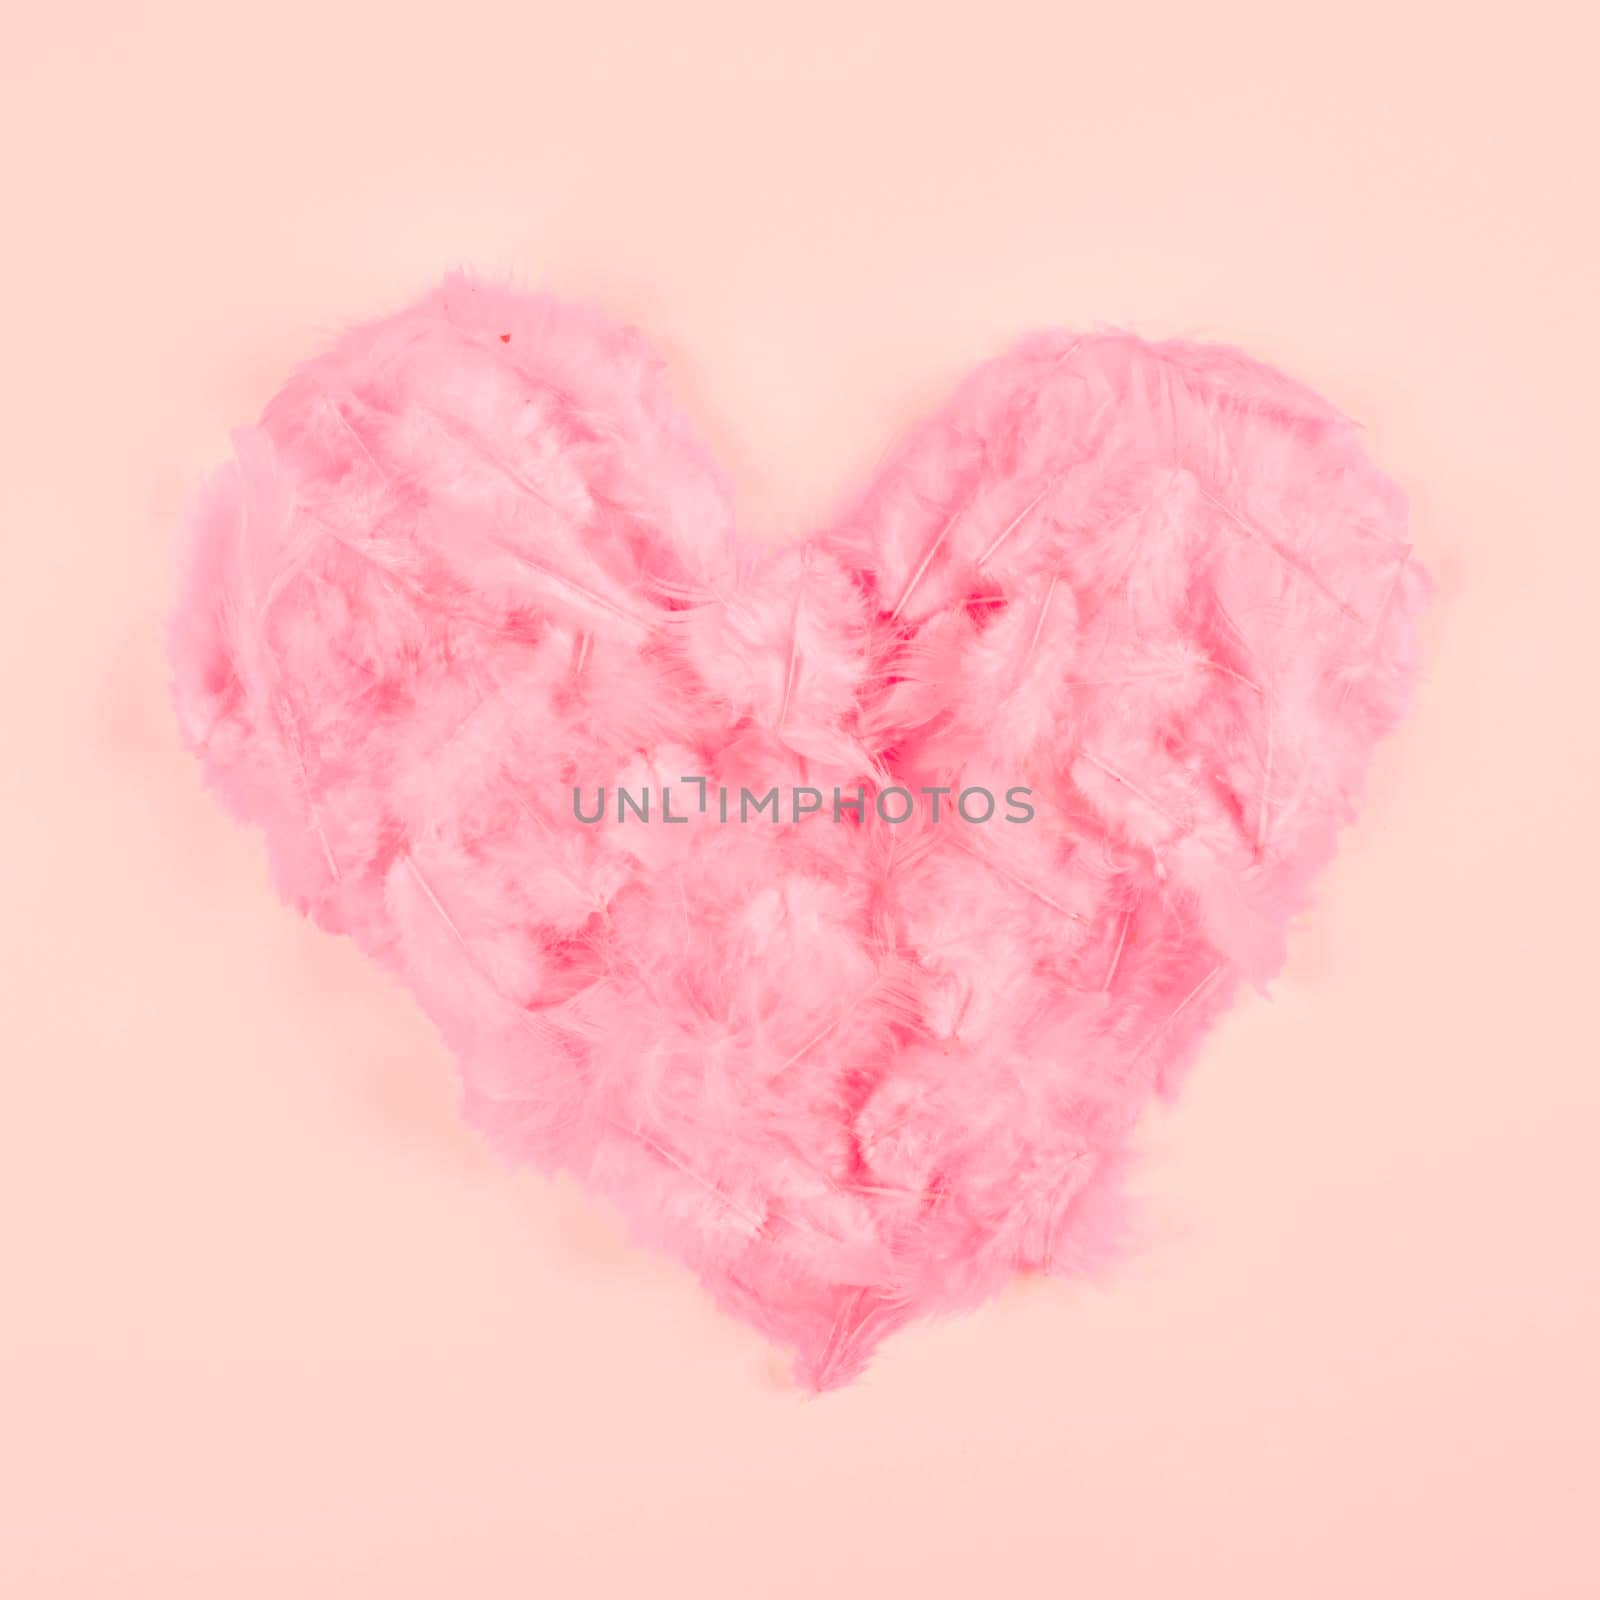 pink soft feather heart shape peach colored background. Beautiful photo